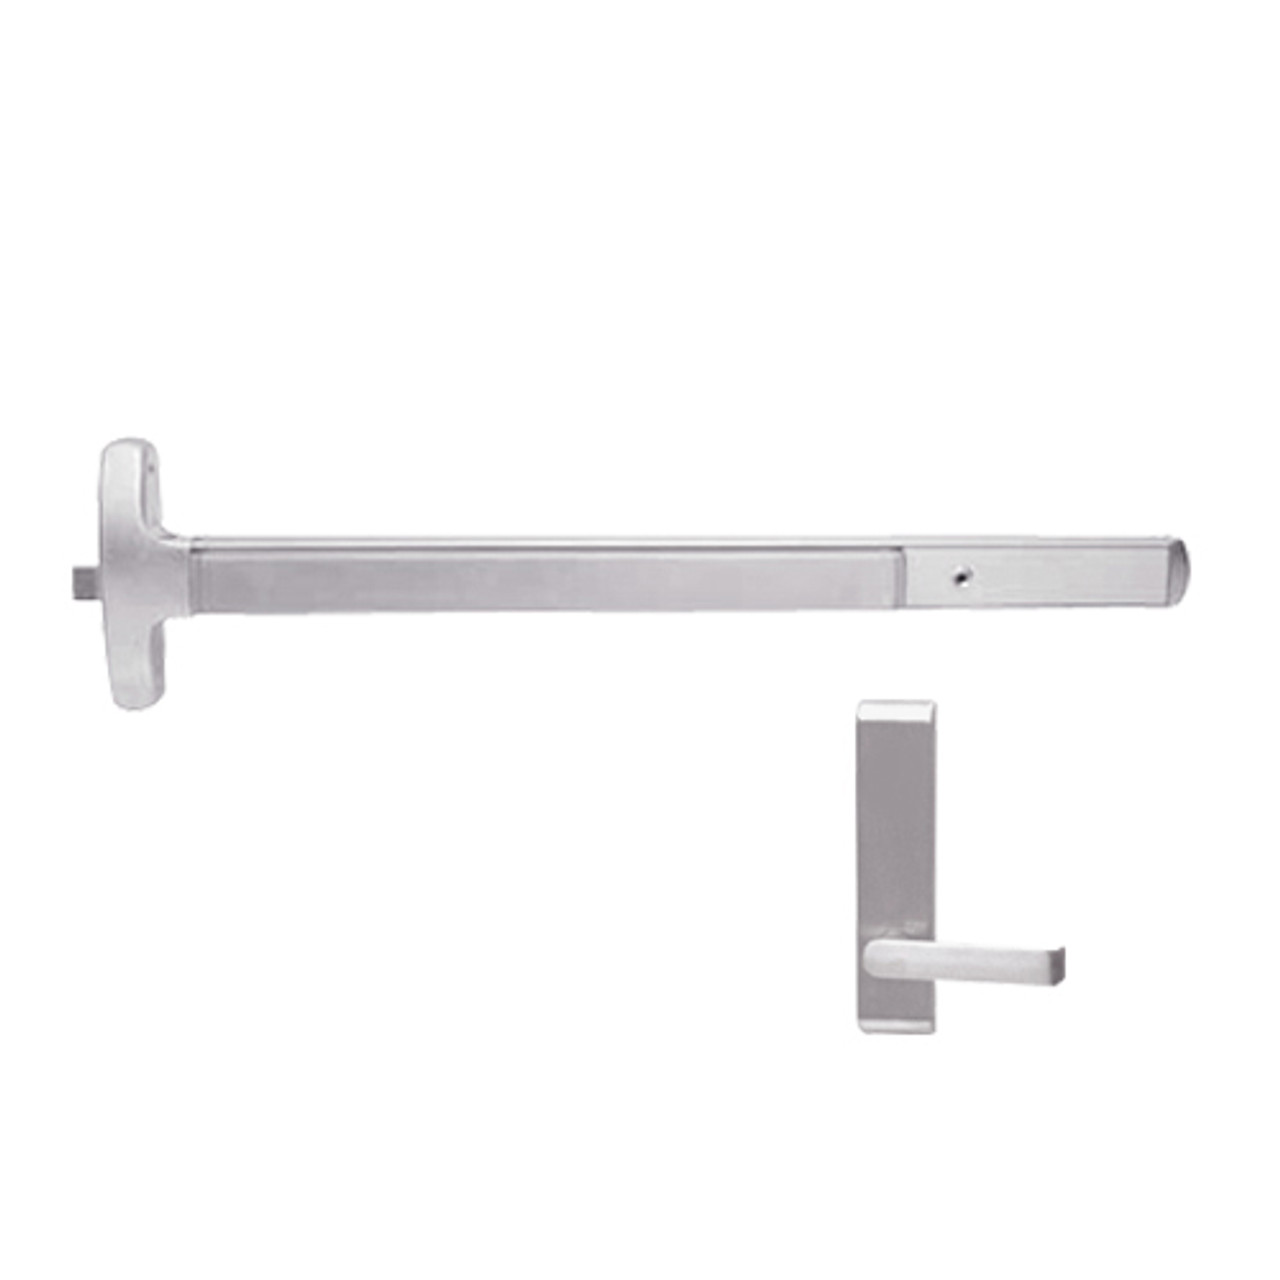 24-R-L-DT-DANE-US32-4-LHR Falcon Exit Device in Polished Stainless Steel